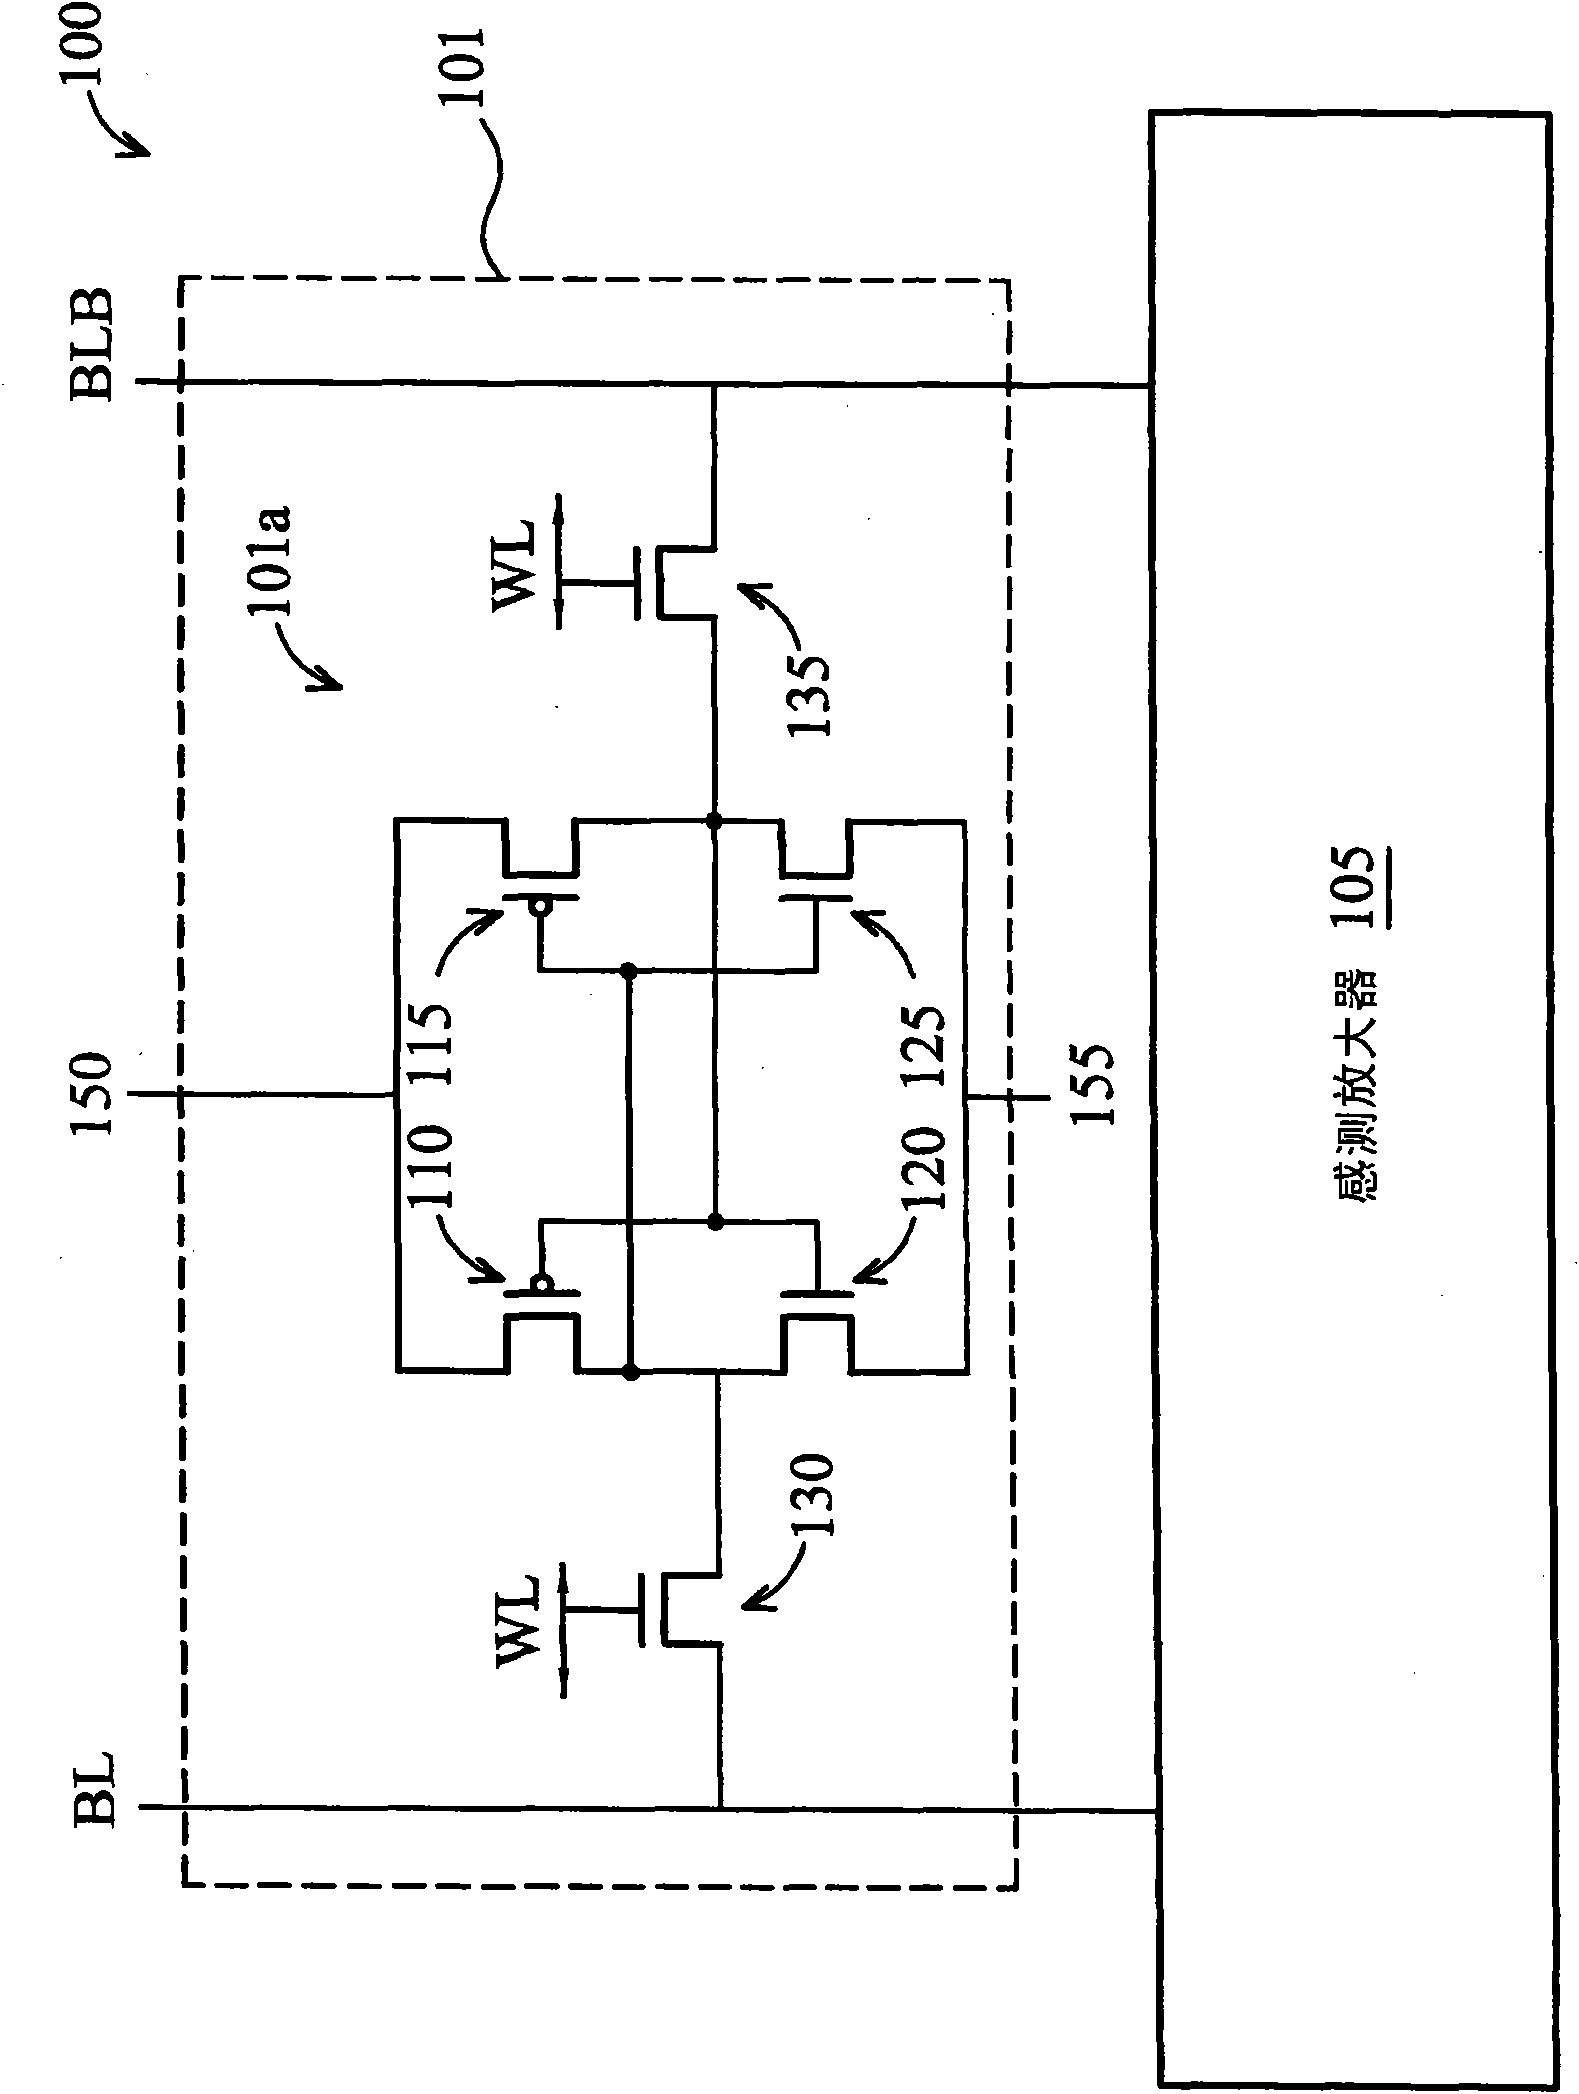 Memory circuits and routing of conductive layers thereof